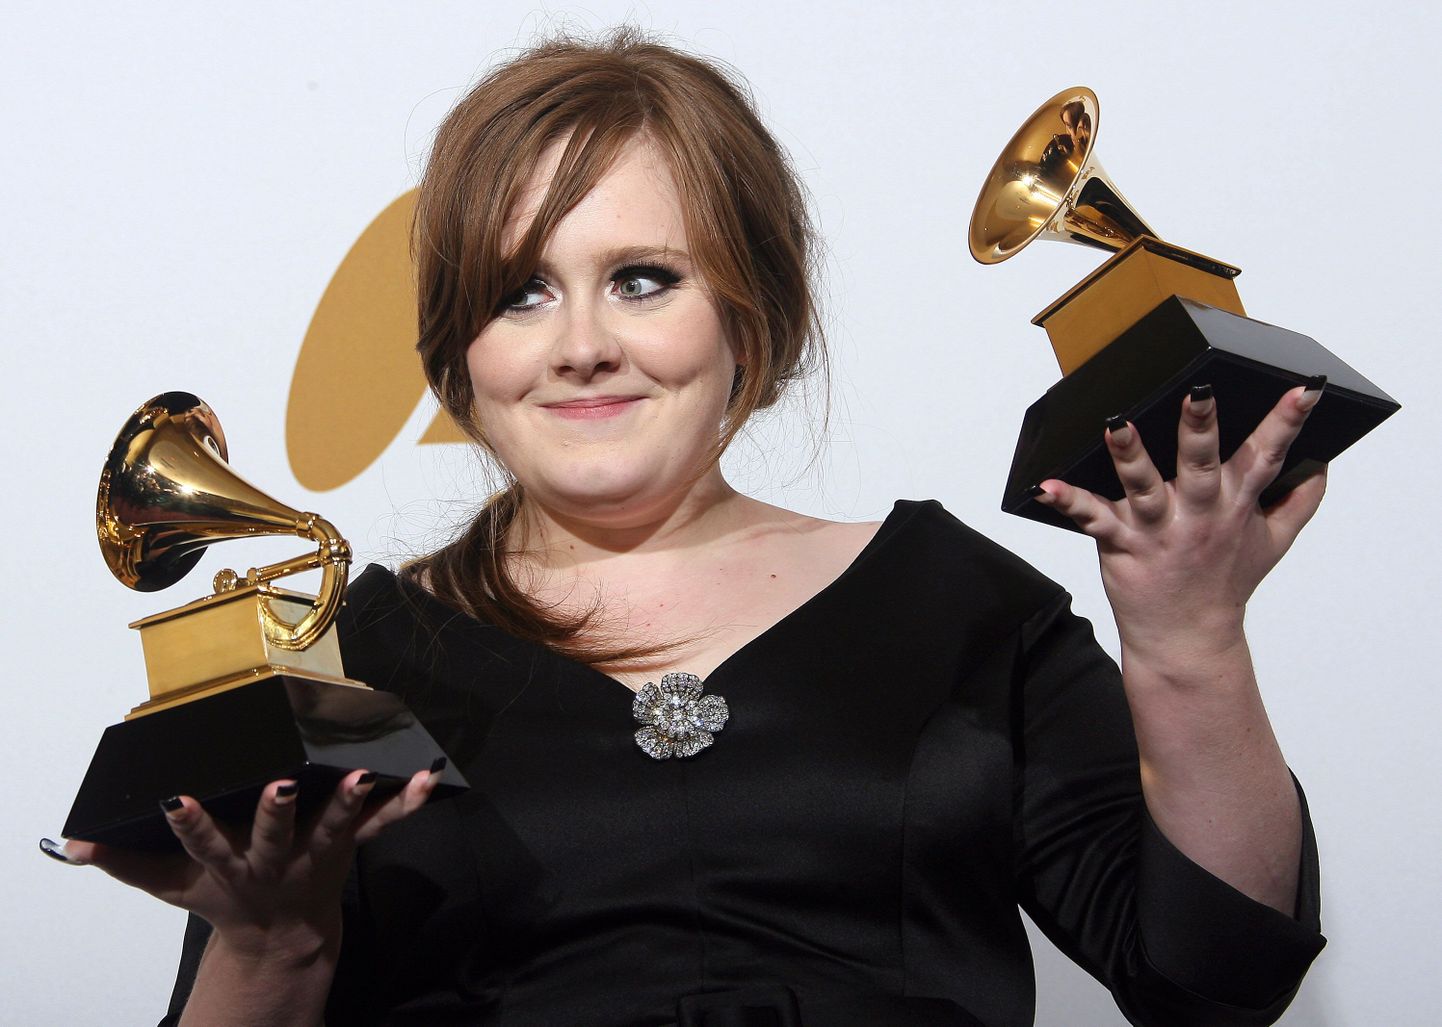 British singer Adele holds the Grammy awards for the Best New Artist and Best Female Pop Vocal Performance for "Chasing Pavements during the 51st annual Grammy awards held at the Staples Center in Los Angeles, on February 8, 2009. AFP PHOTO / VALERIE MACON